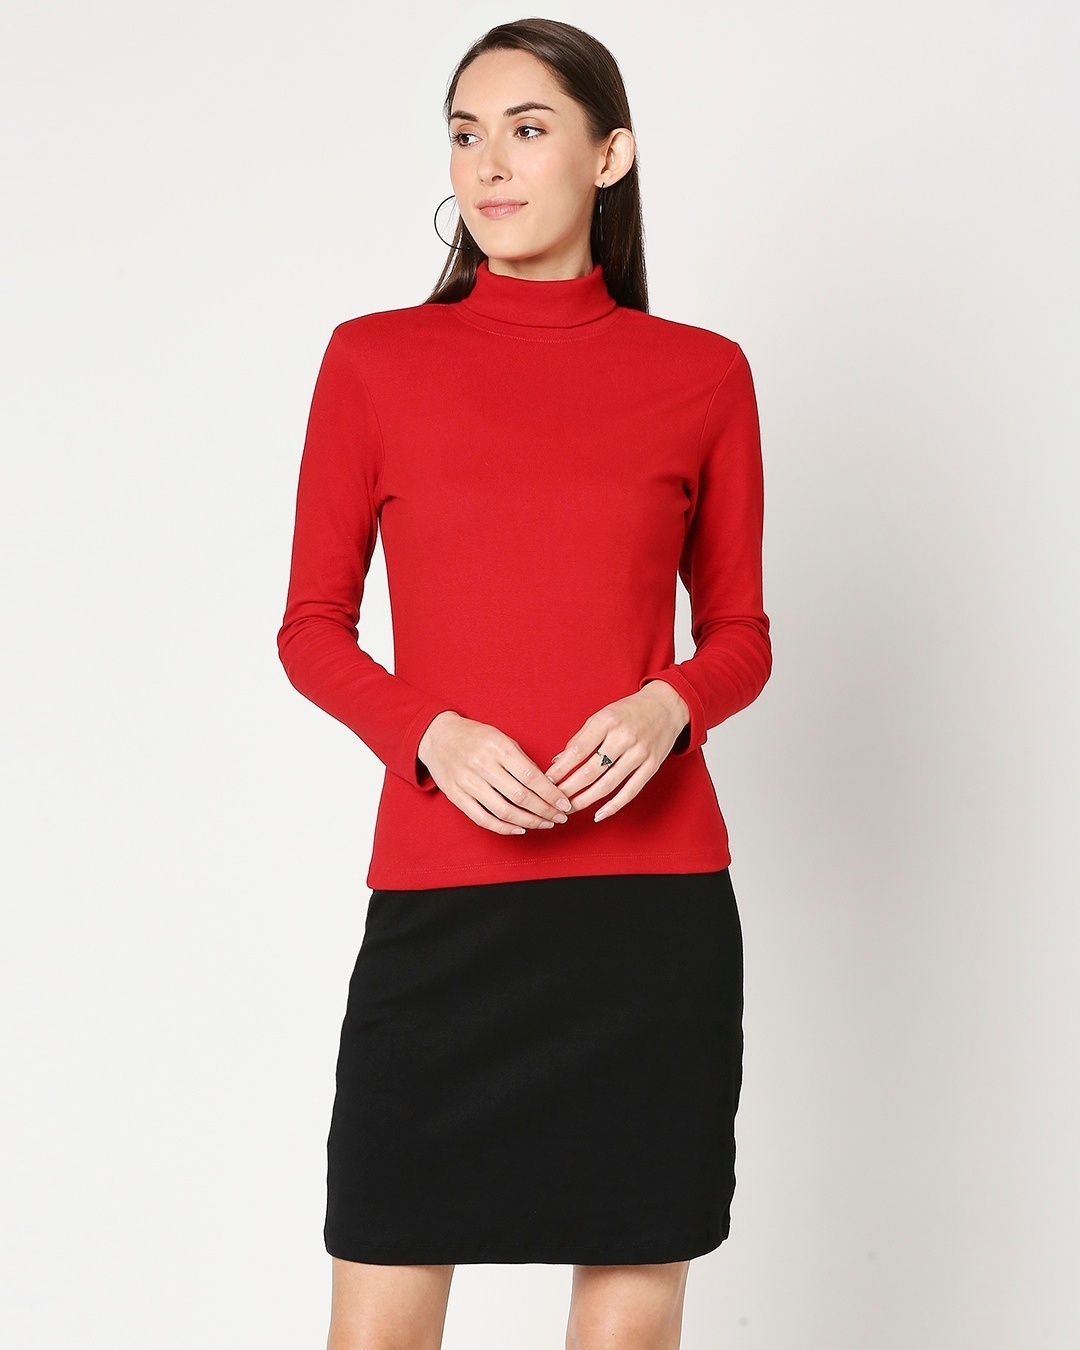 Shop Women's Slip Dress with Red Turtle Neck Top-Back